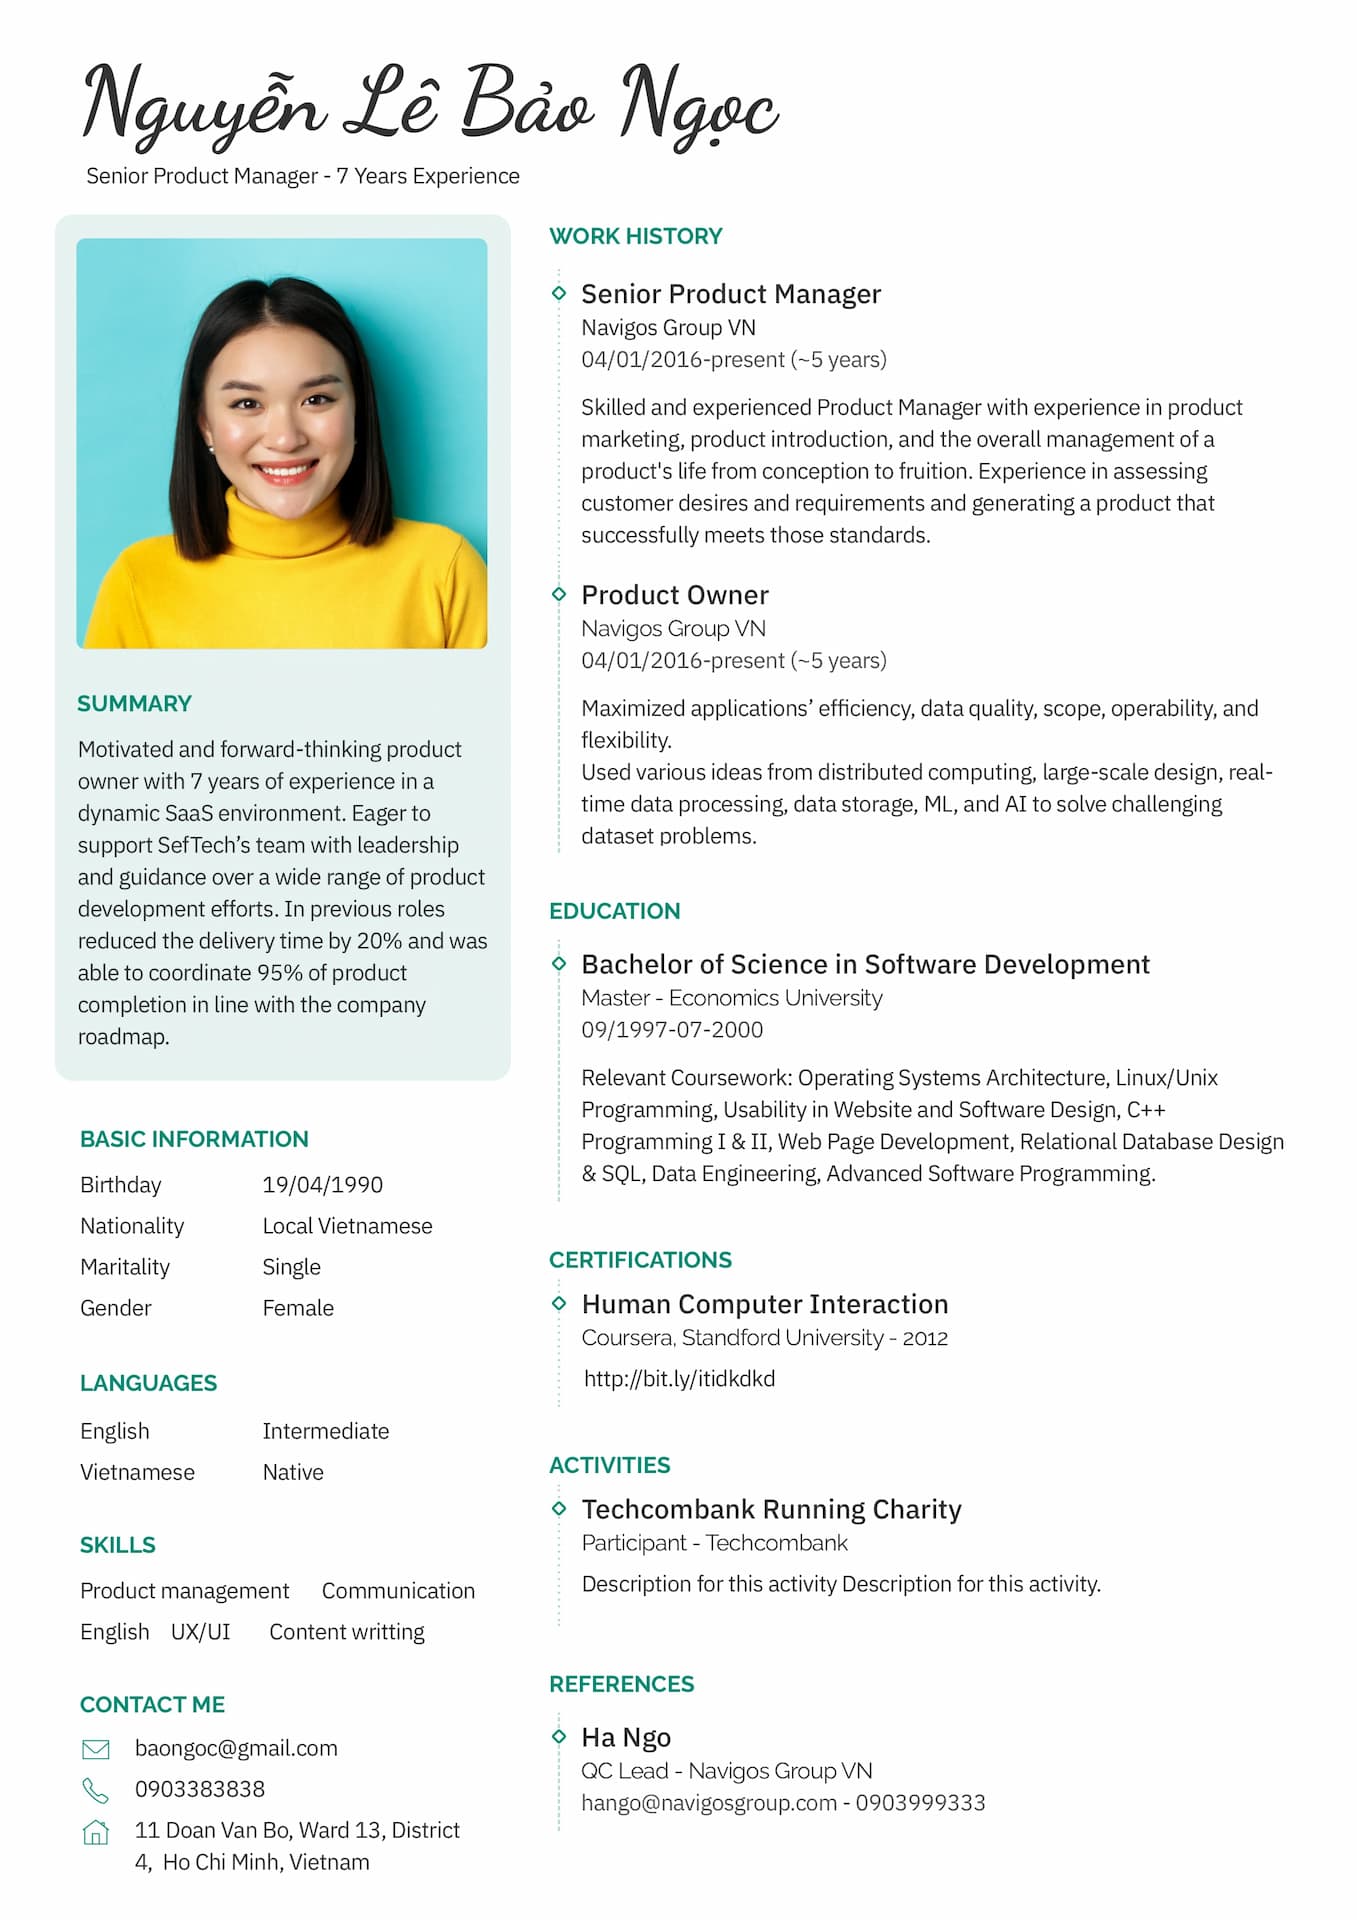 The professional CV template